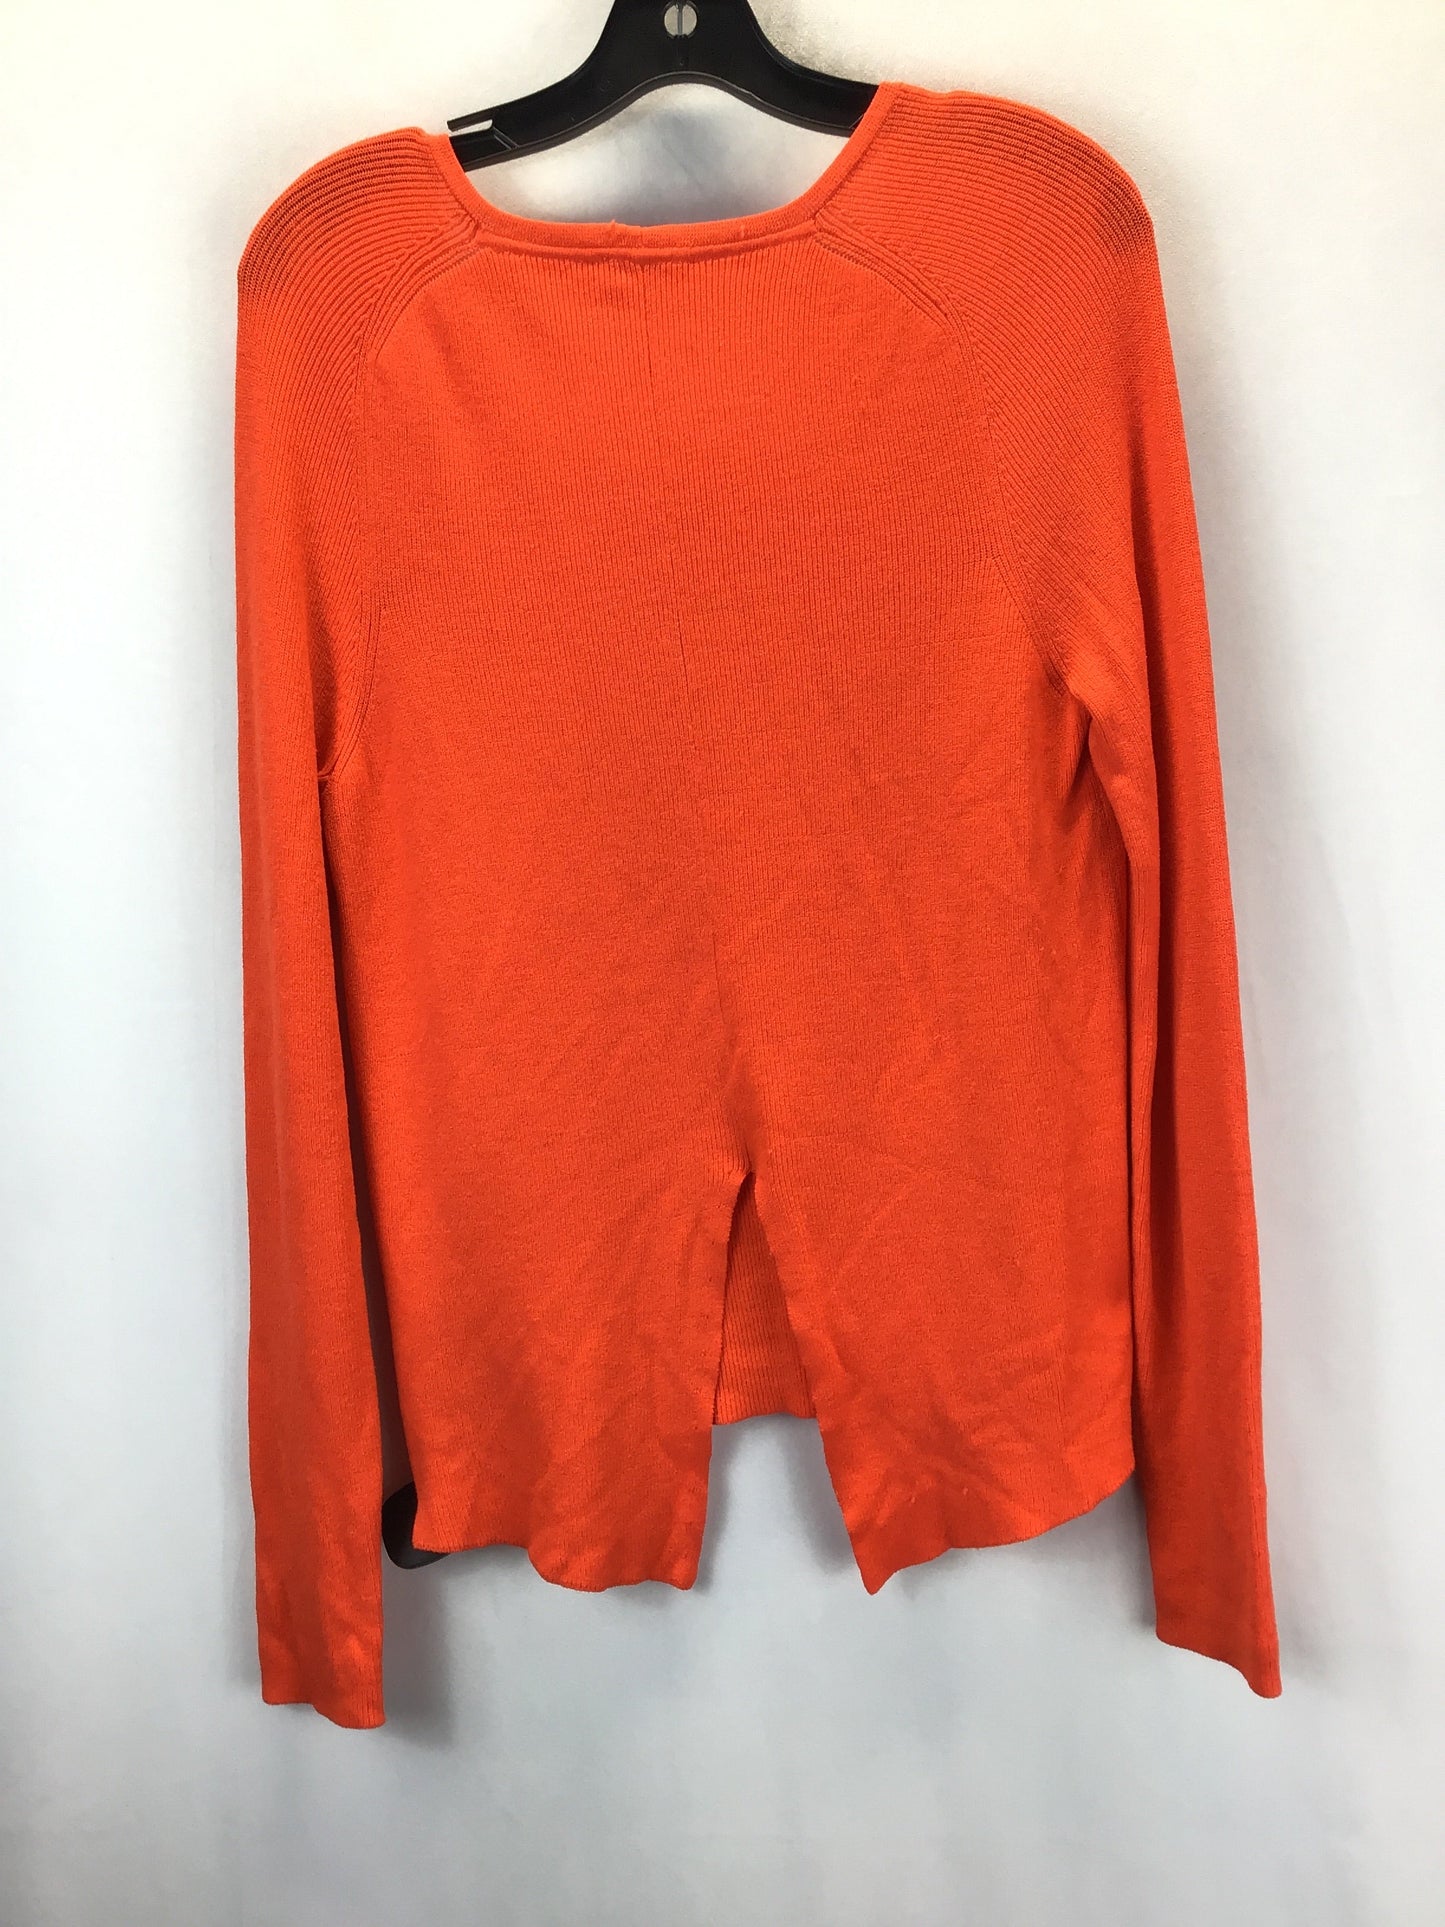 Sweater By Alc  Size: Xs